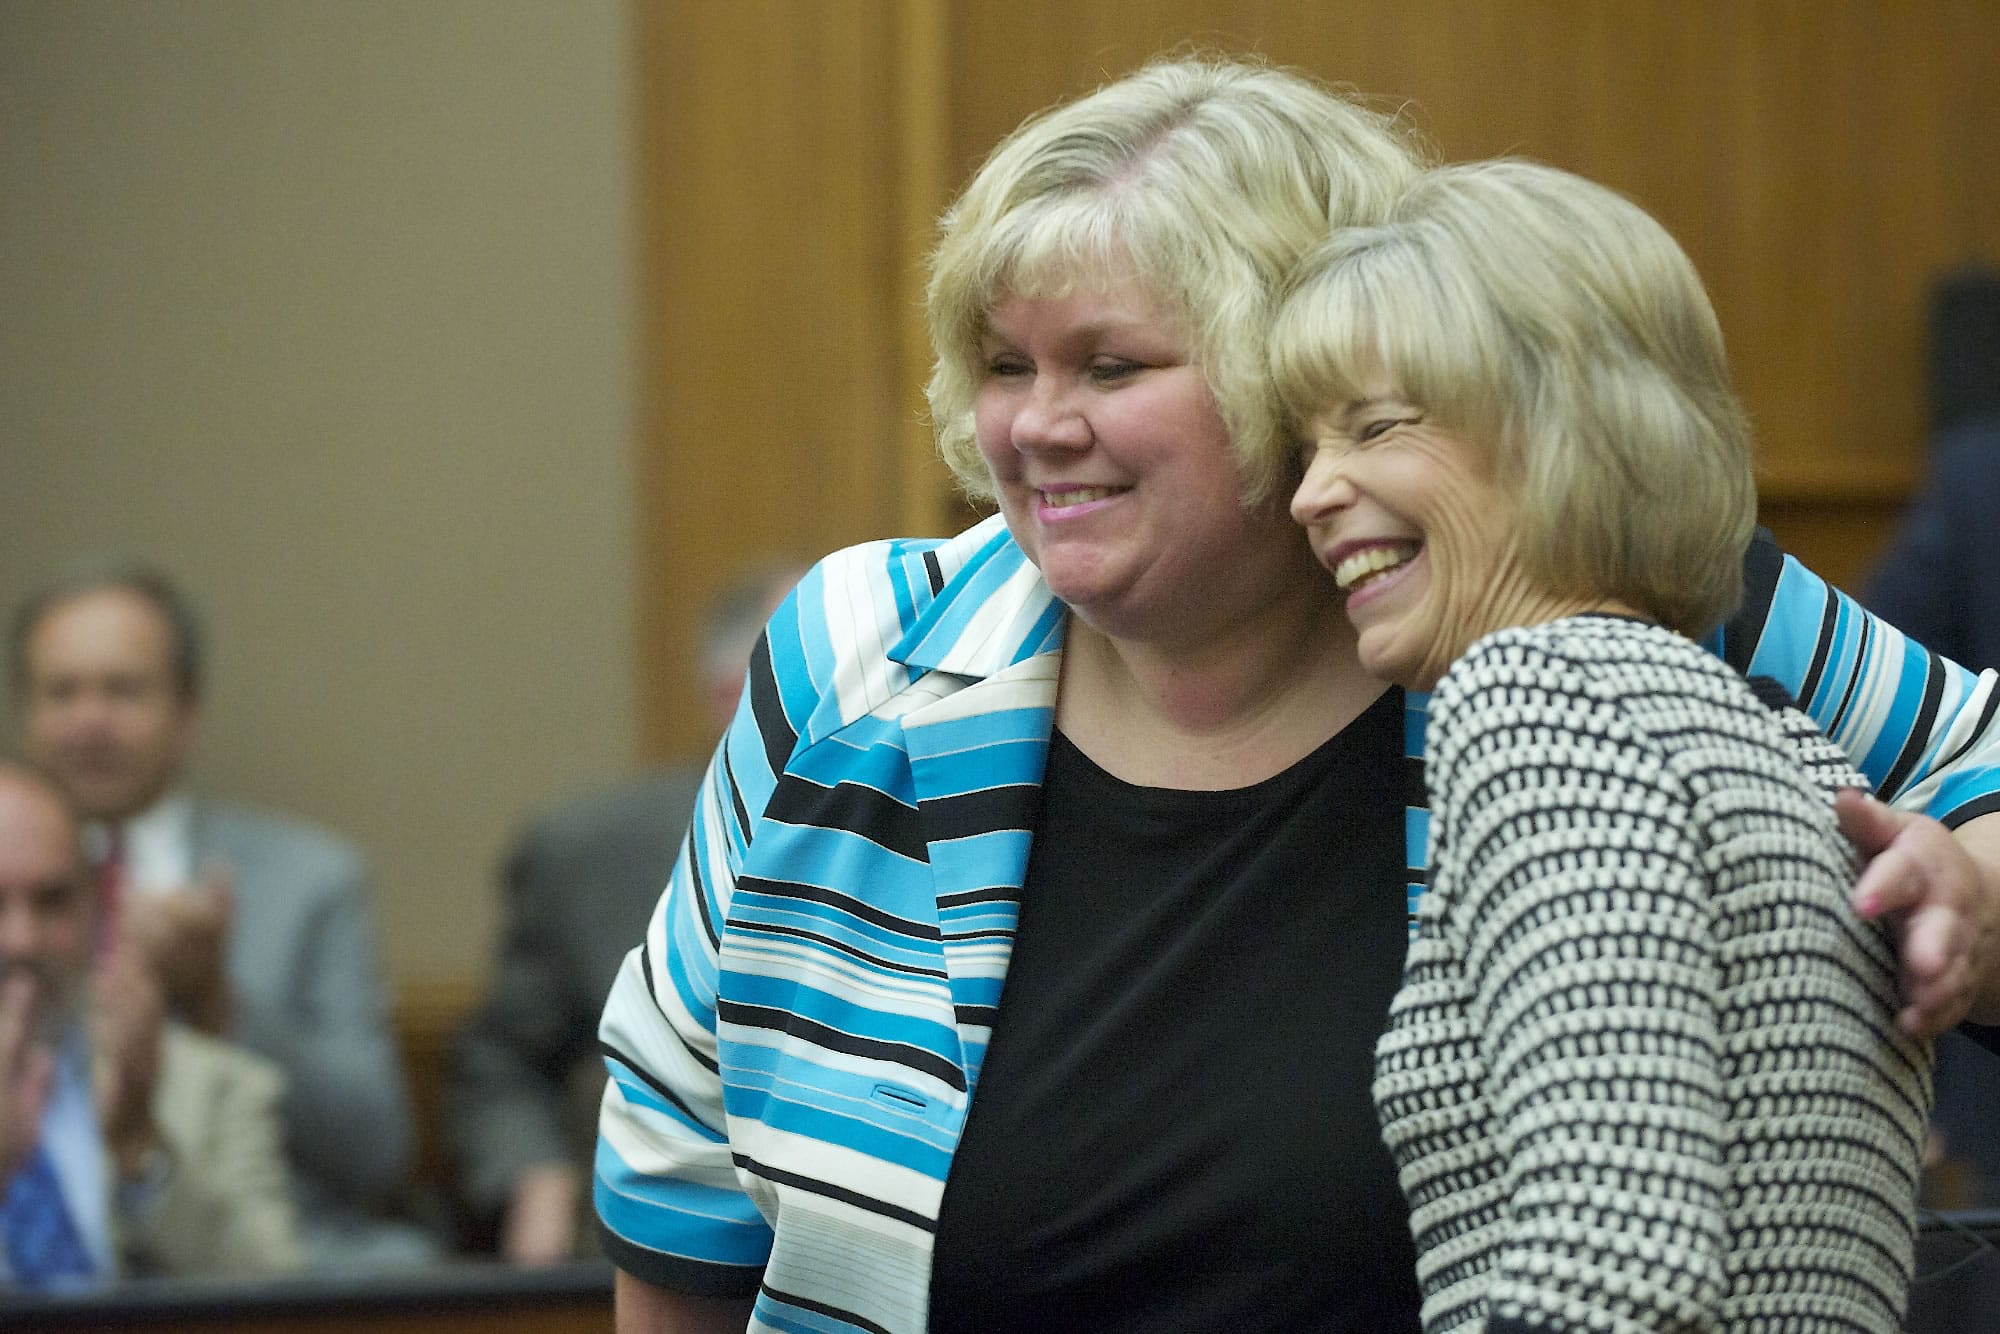 Clark County Superior Court Judge Barbara Johnson,right, hugs Vancouver attorney Suzan L. Clark on May 6 after Gov. Jay Inslee appointed Clark as the next Superior Court judge.